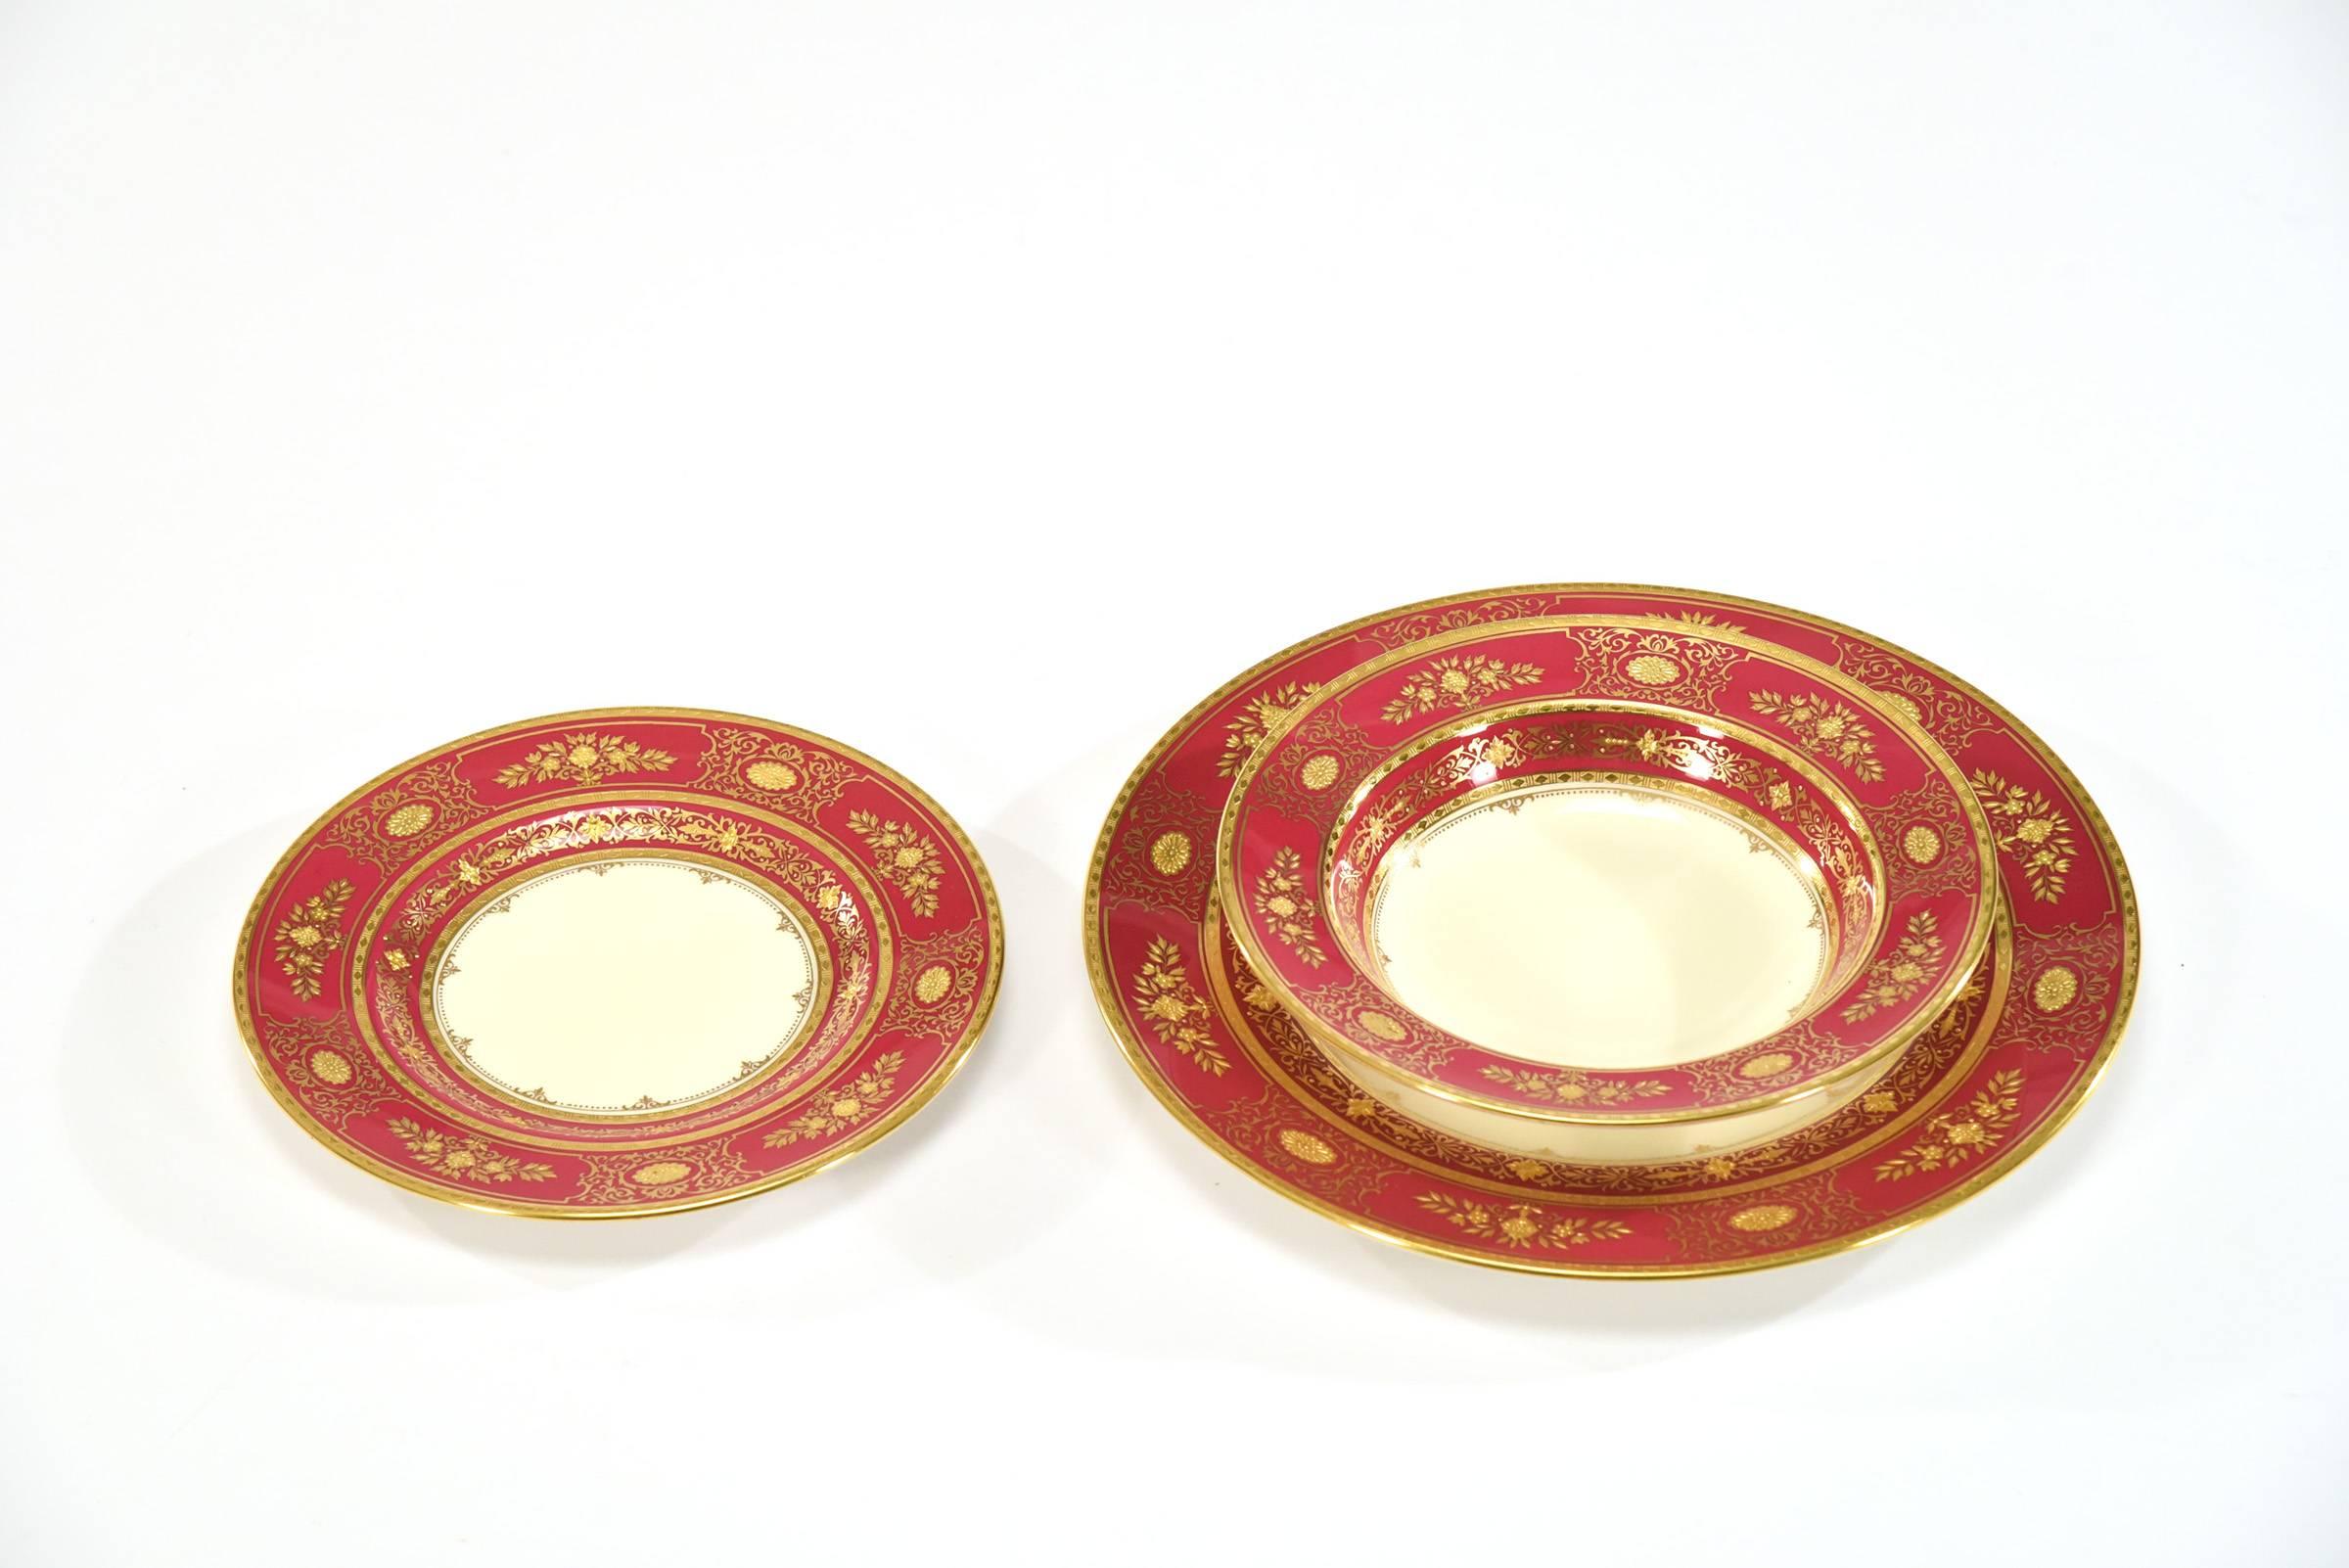 English Minton for Tiffany Burgundy/Red & Raised Gold Dinner Service for 13-39 Pcs